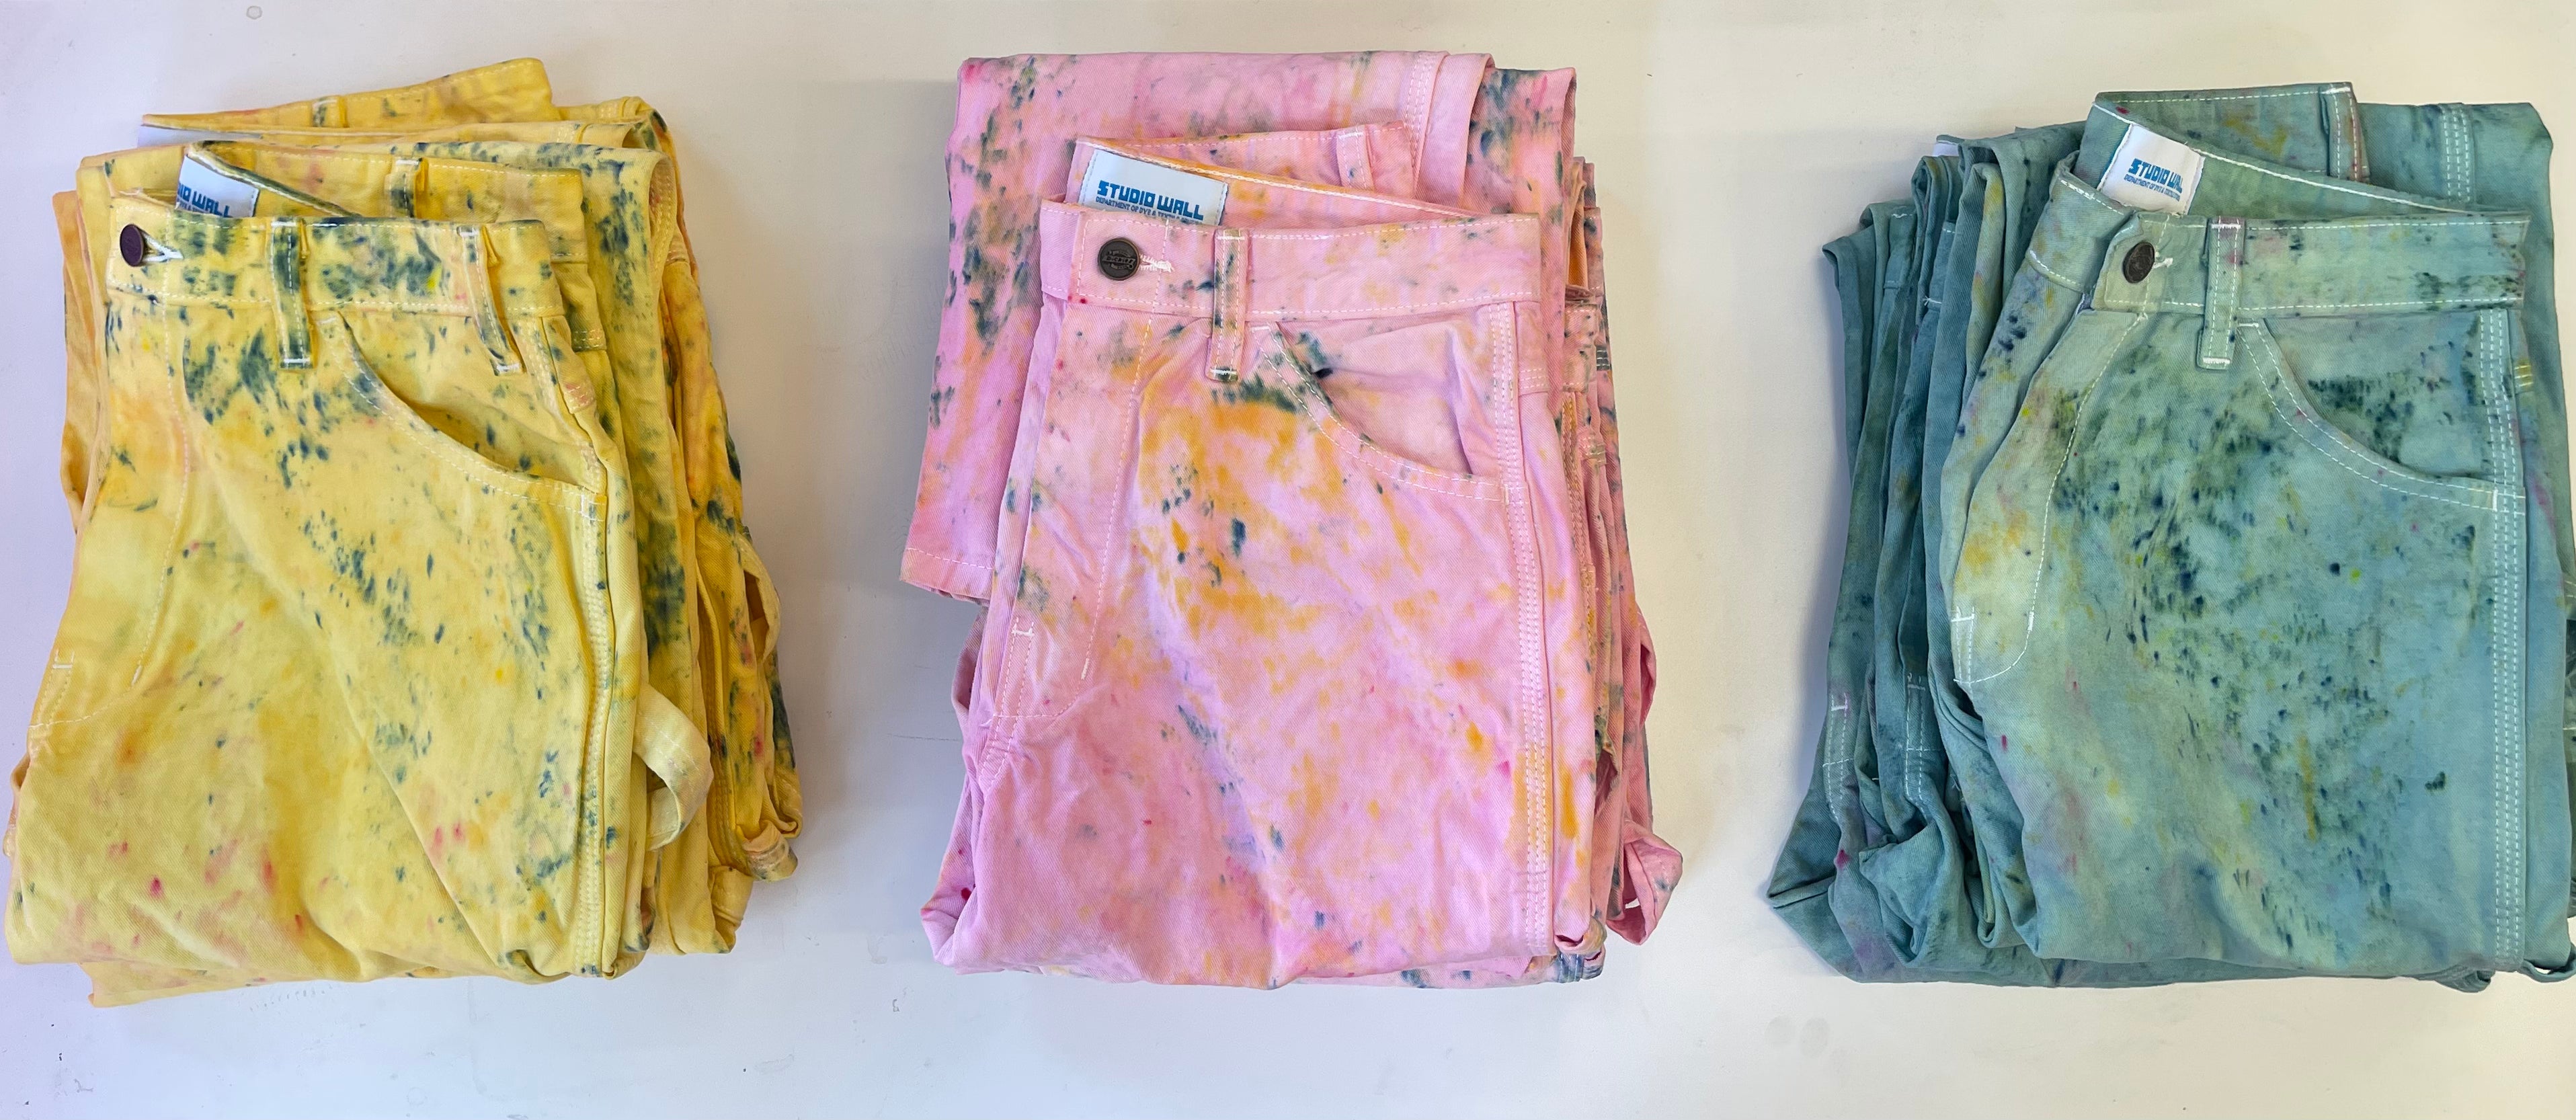 Studio Wall- hand dyed painter pant